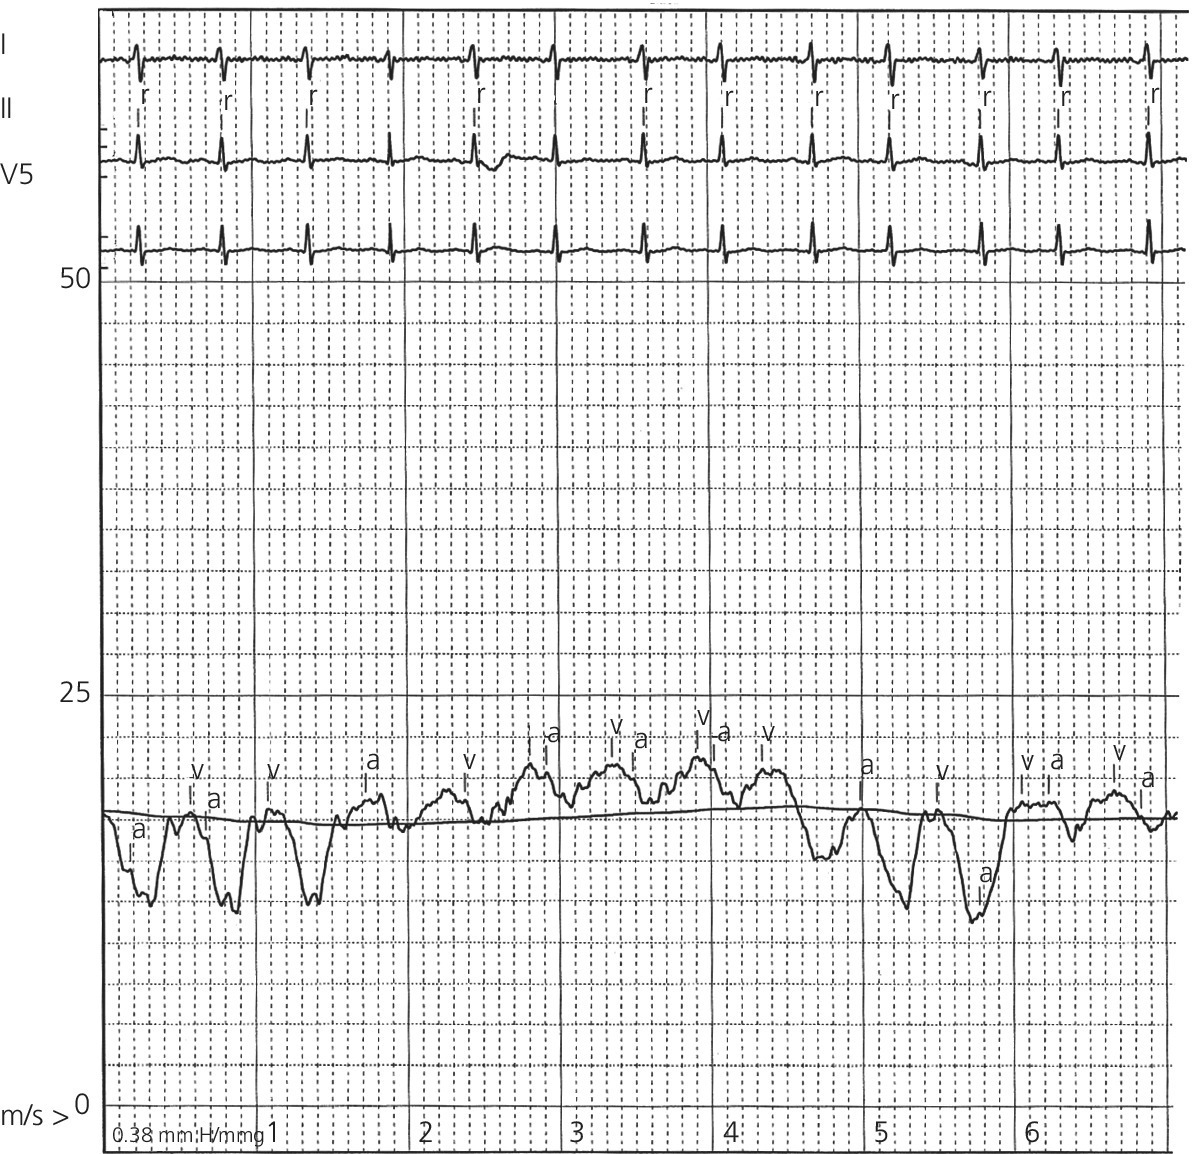 ECG produced by RA tracing in a patient with pericardial tamponade, displaying blunted X and Y descent waves.